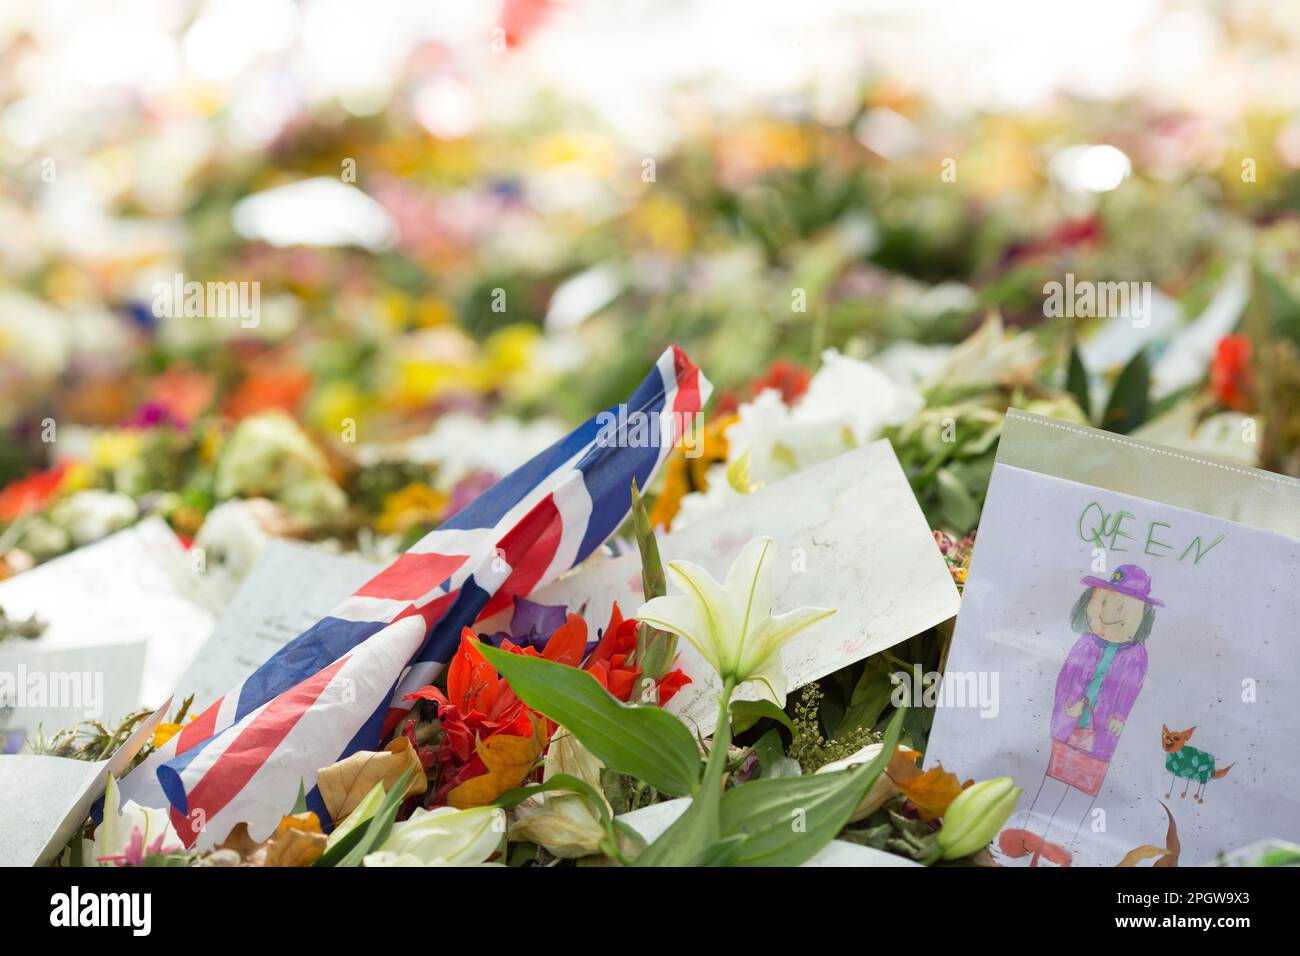 People visit Green Park, where floral tributes are left, close to Buckingham Palace in London on the 1st Saturday since the funeral of the late queen. Stock Photo